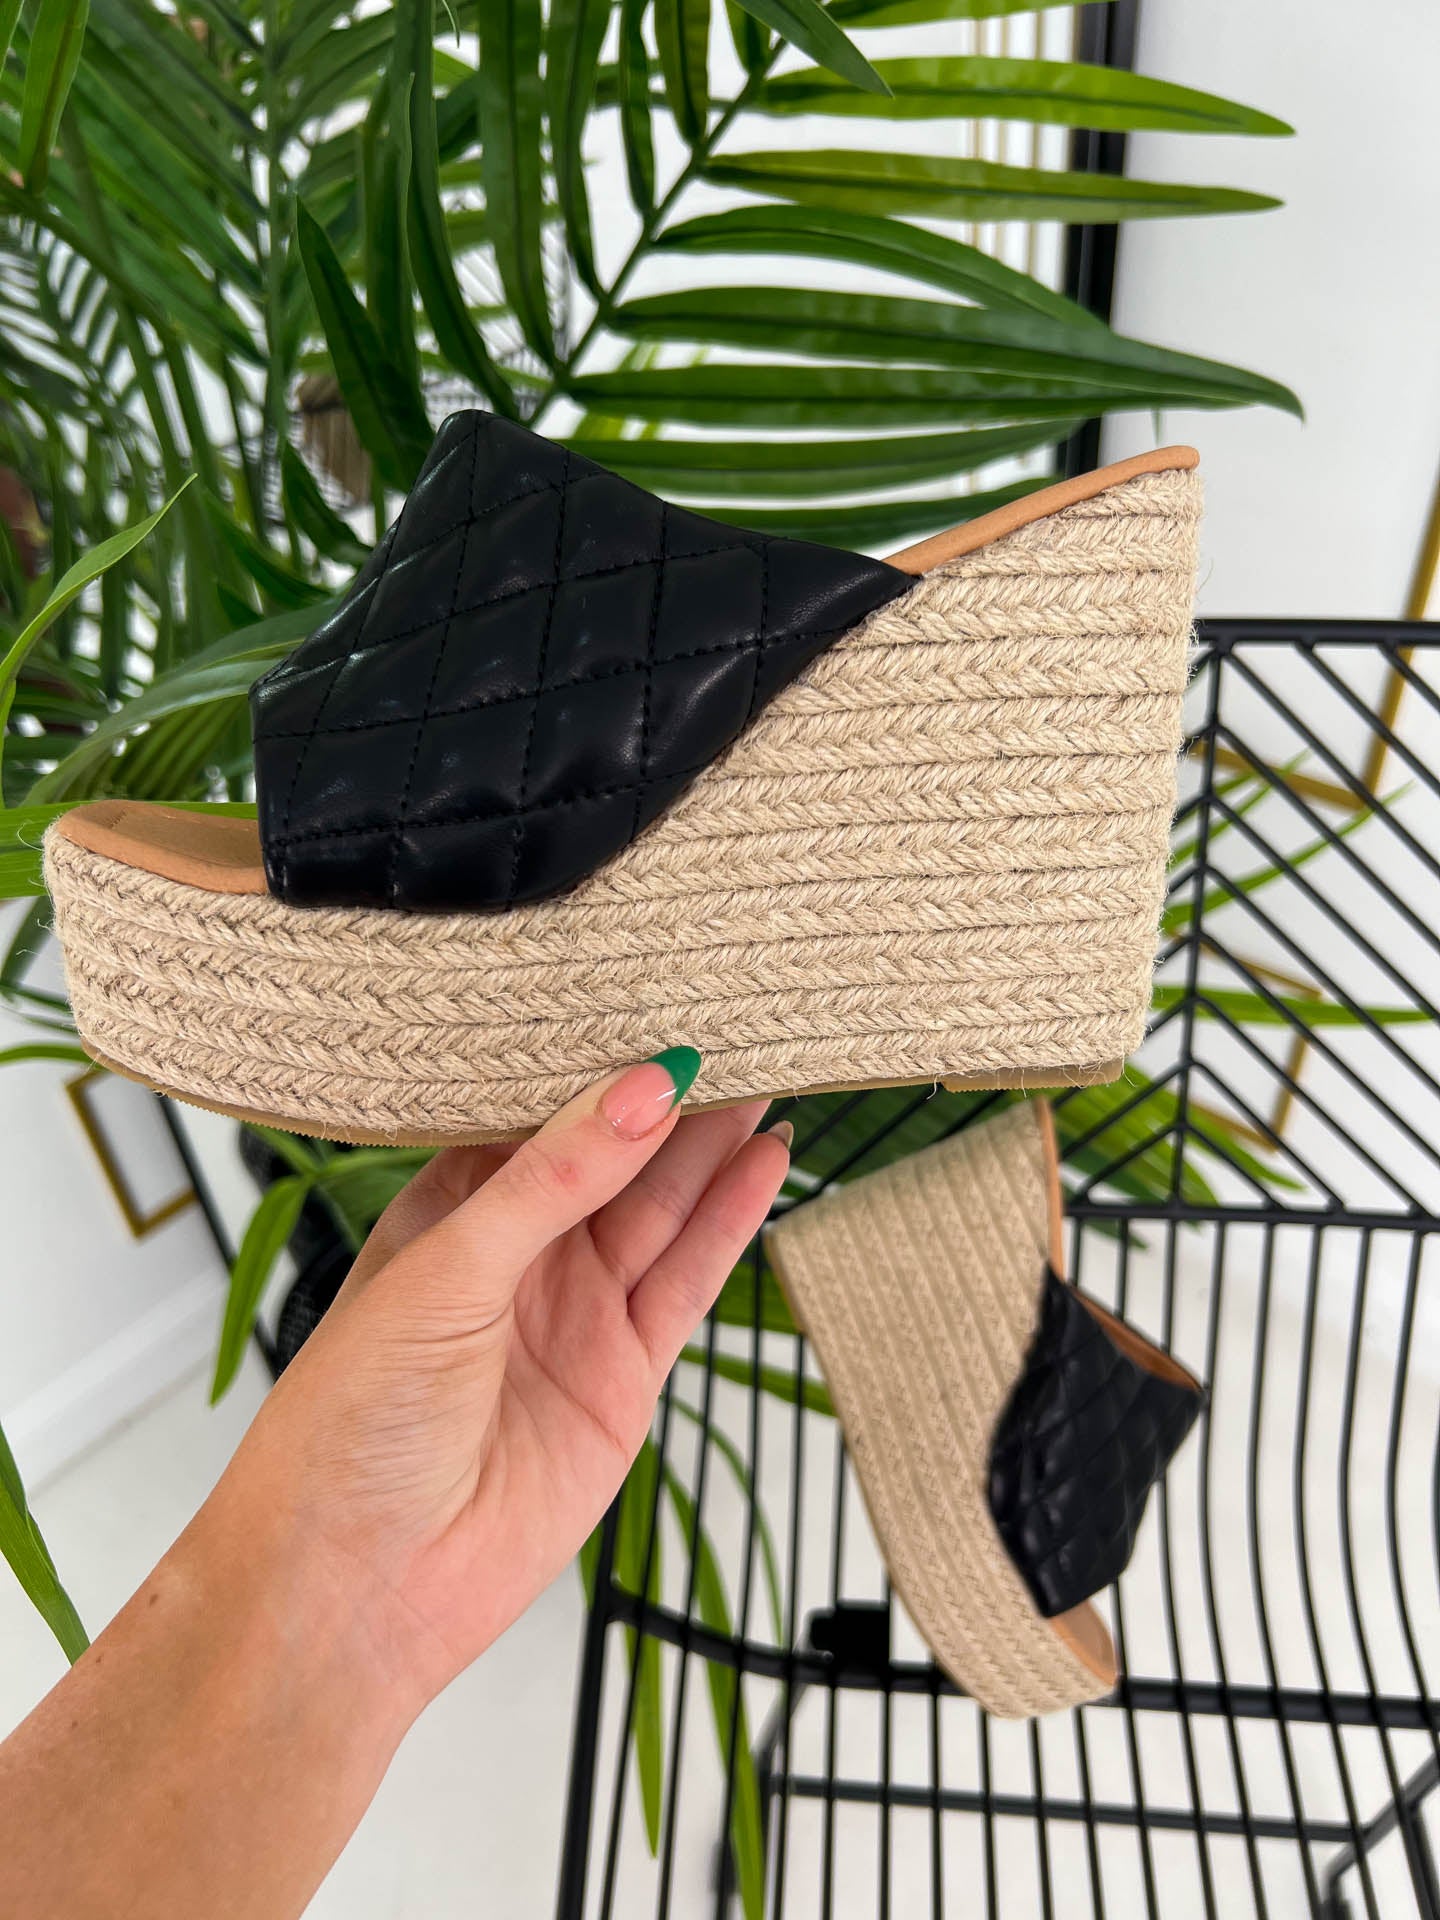 The Erica - Quilted Mule Wedges